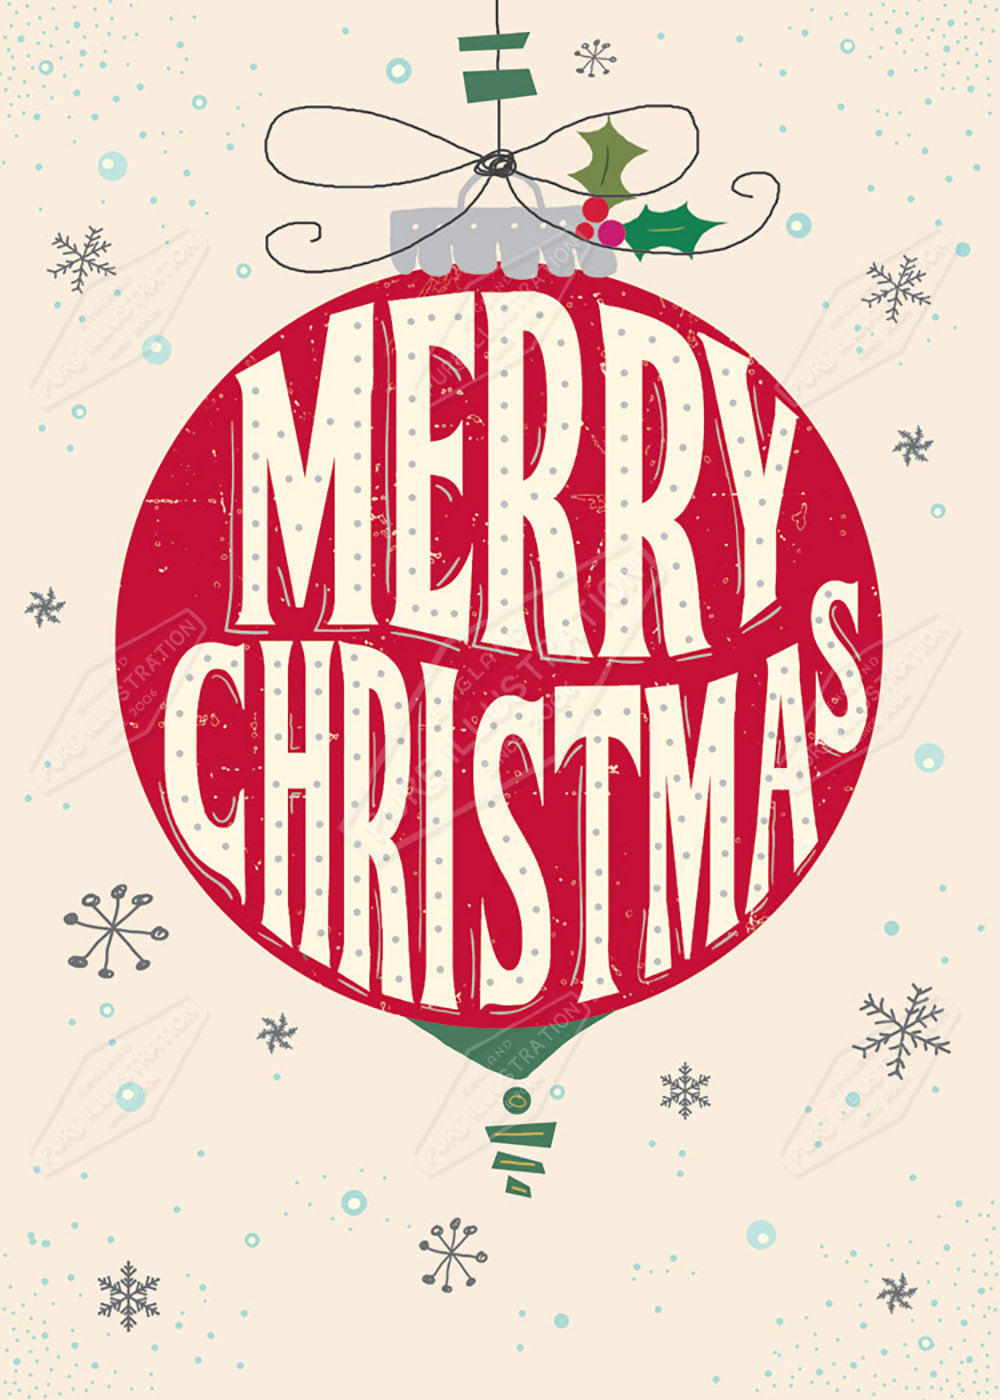 Merry Christmas Retro Bauble Image by Cory Reid for Pure Art Licensing Agency & Surface Design Studio